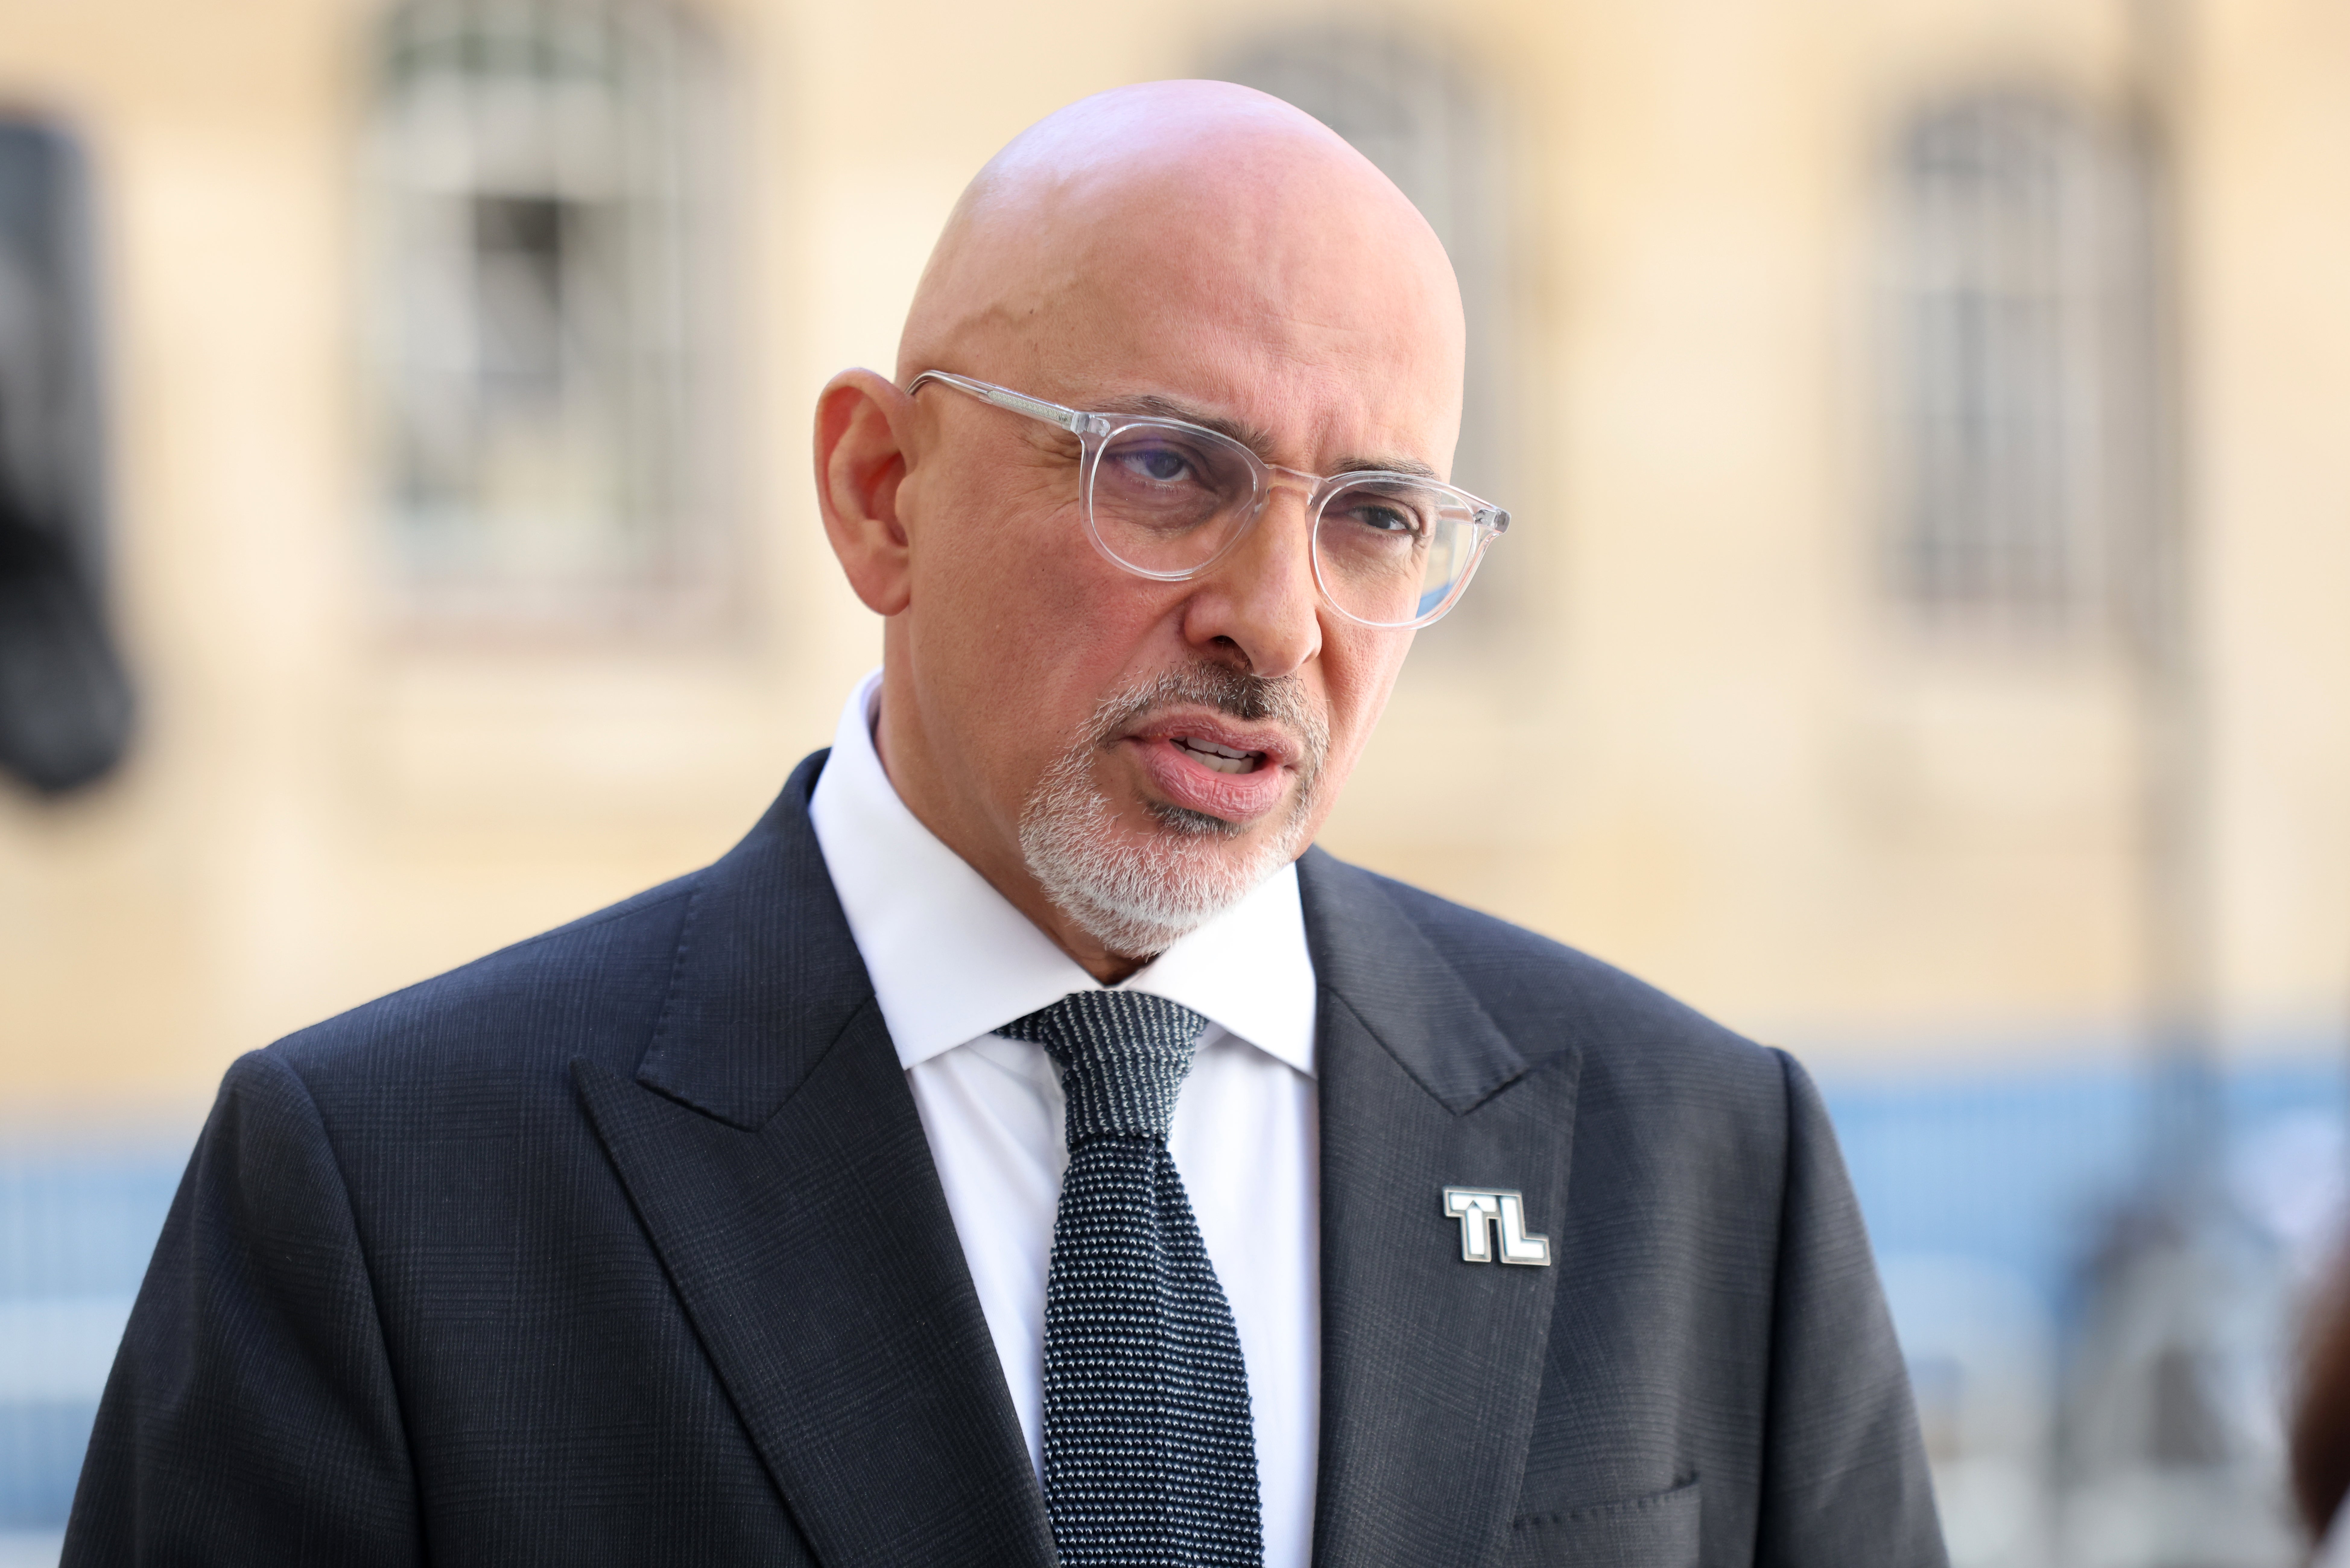 Nadhim Zahawi was appointed chancellor on Tuesday night